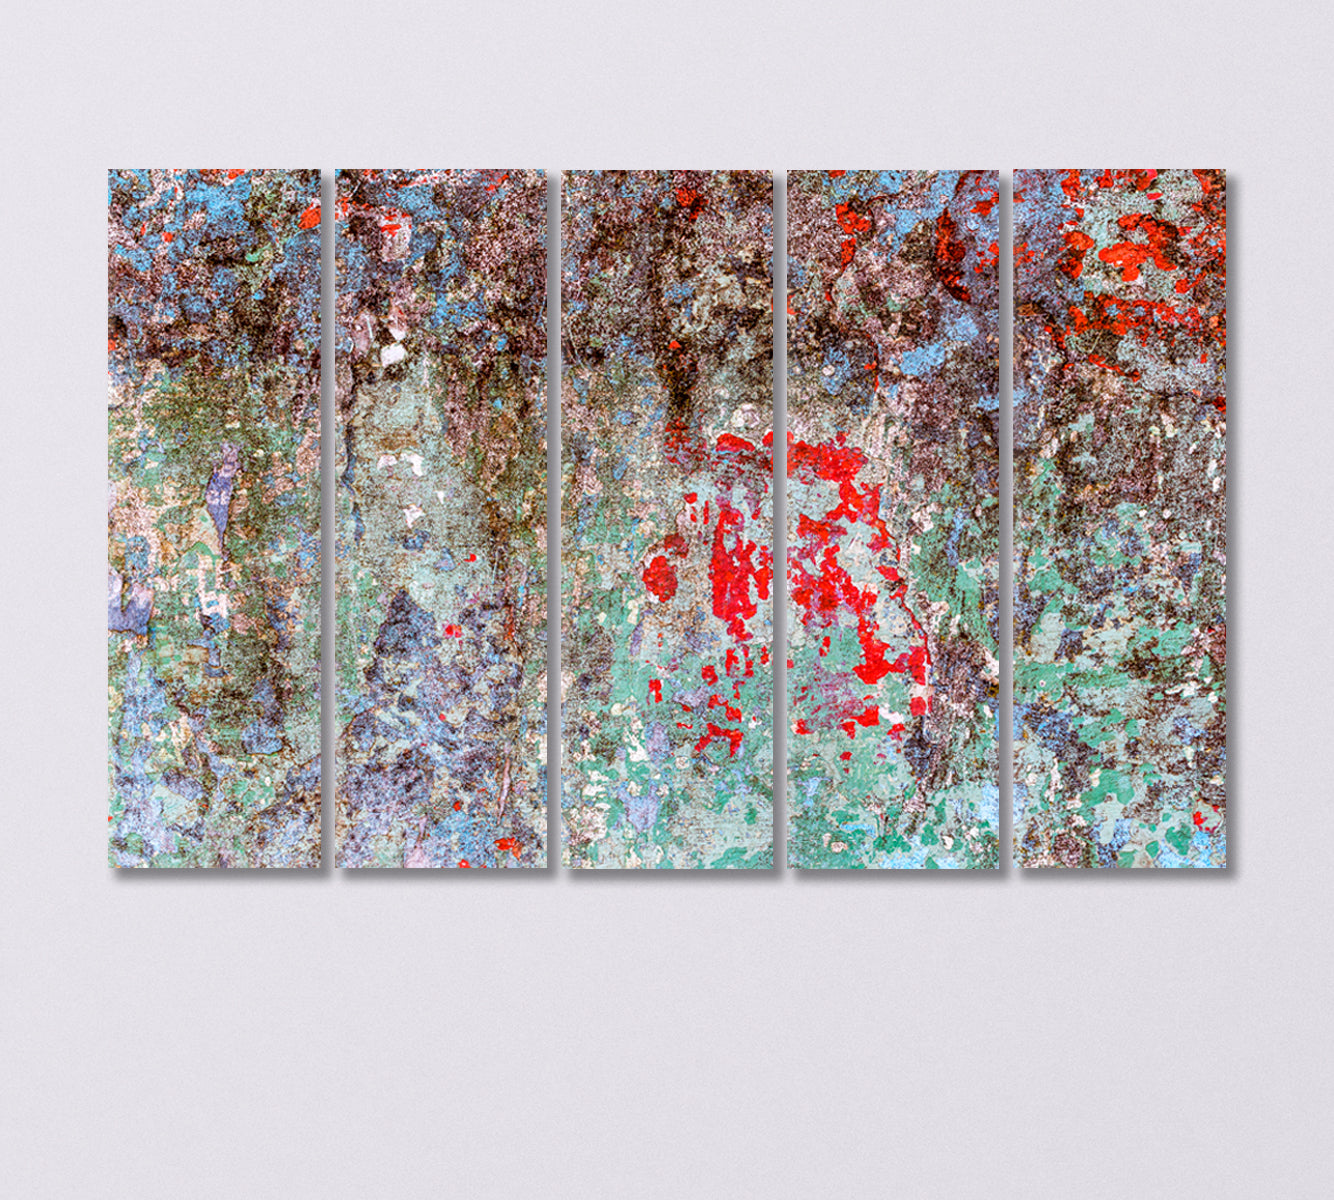 Abstract Cracked Wall Effect Canvas Print-Canvas Print-CetArt-5 Panels-36x24 inches-CetArt